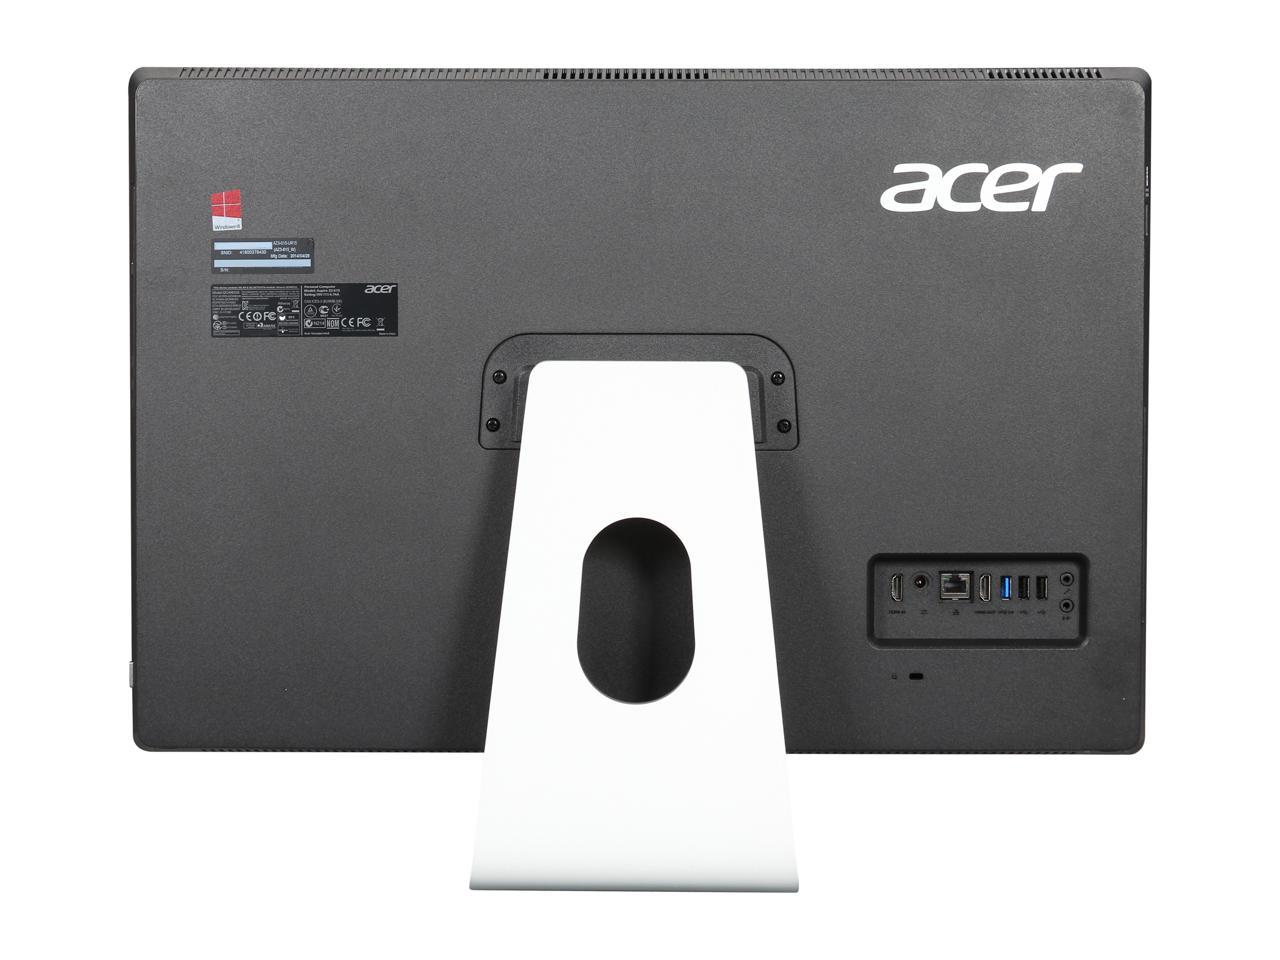 Refurbished: Acer All-in-One PC Aspire AZ3-615-UR15 Intel Core i5-4570T ...